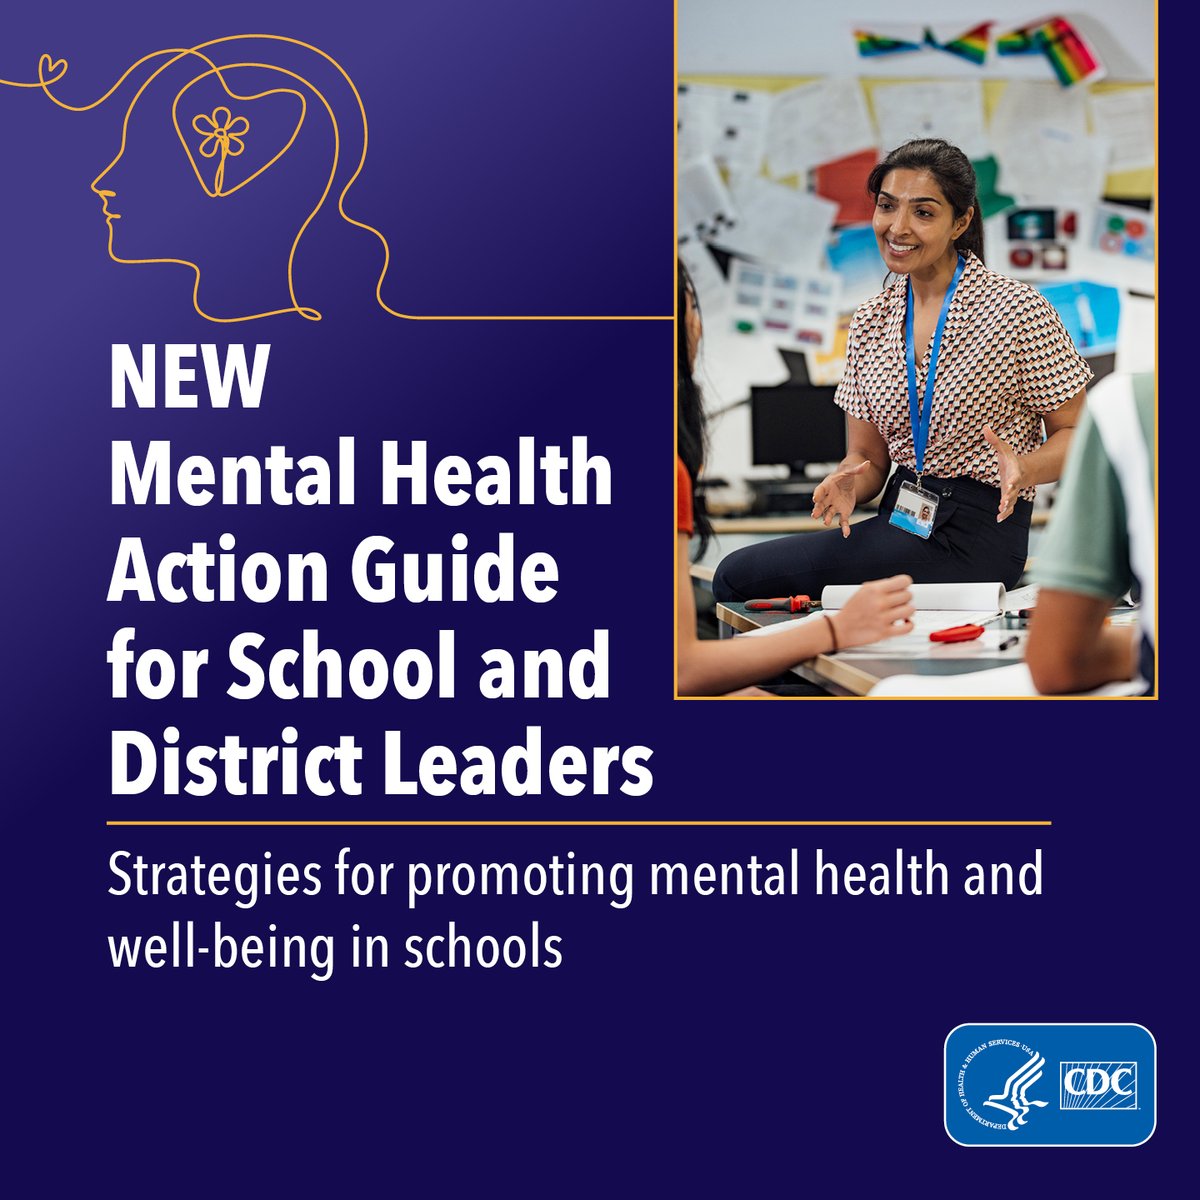 CDC's new action guide for school and district leaders provides six strategies schools can use to improve students’ mental health. Learn more from @CDC_DASH: go.hc.gov/4ai3JS4 #CDCMentalHealth